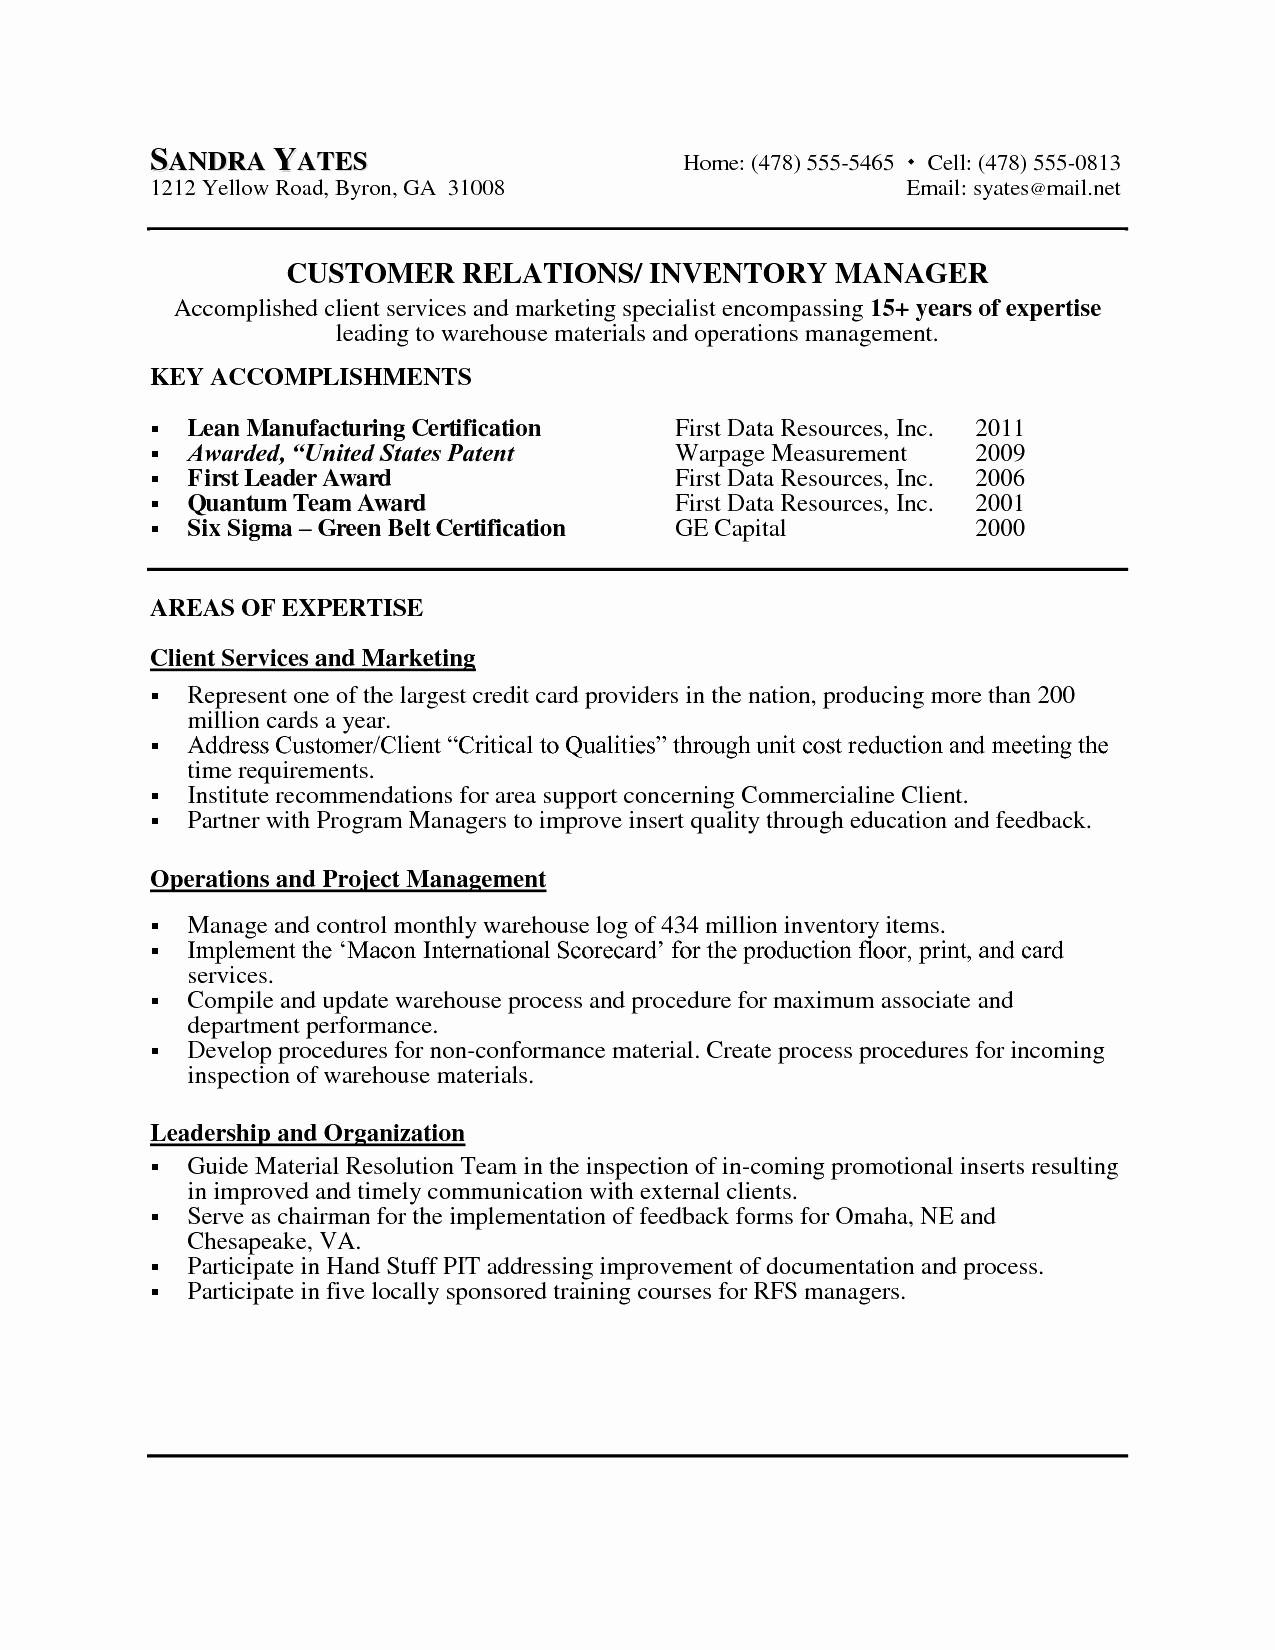 Email Letter Of Recommendation Template - Resume Referee Sample Elegant Resume Points Best American Resume